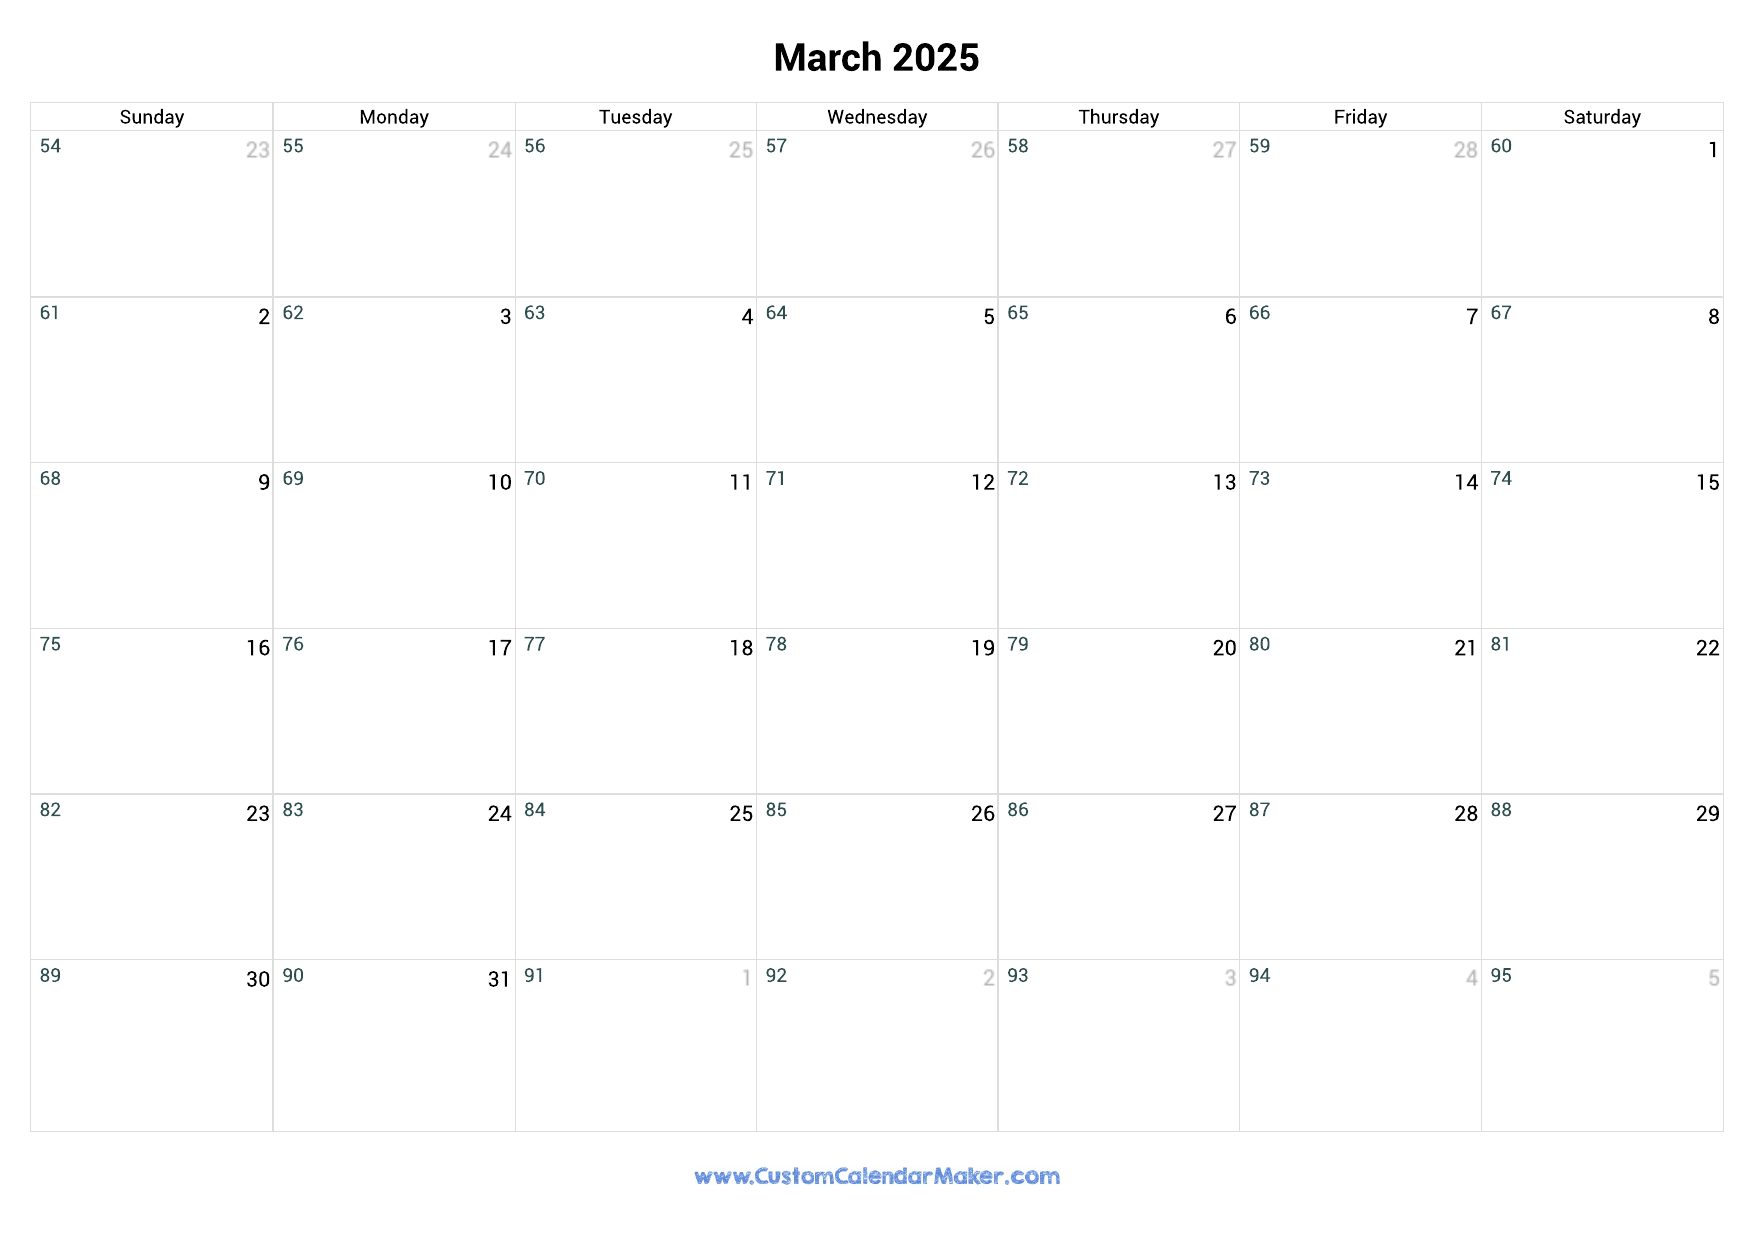 march-2025-day-number-of-the-year-calendar